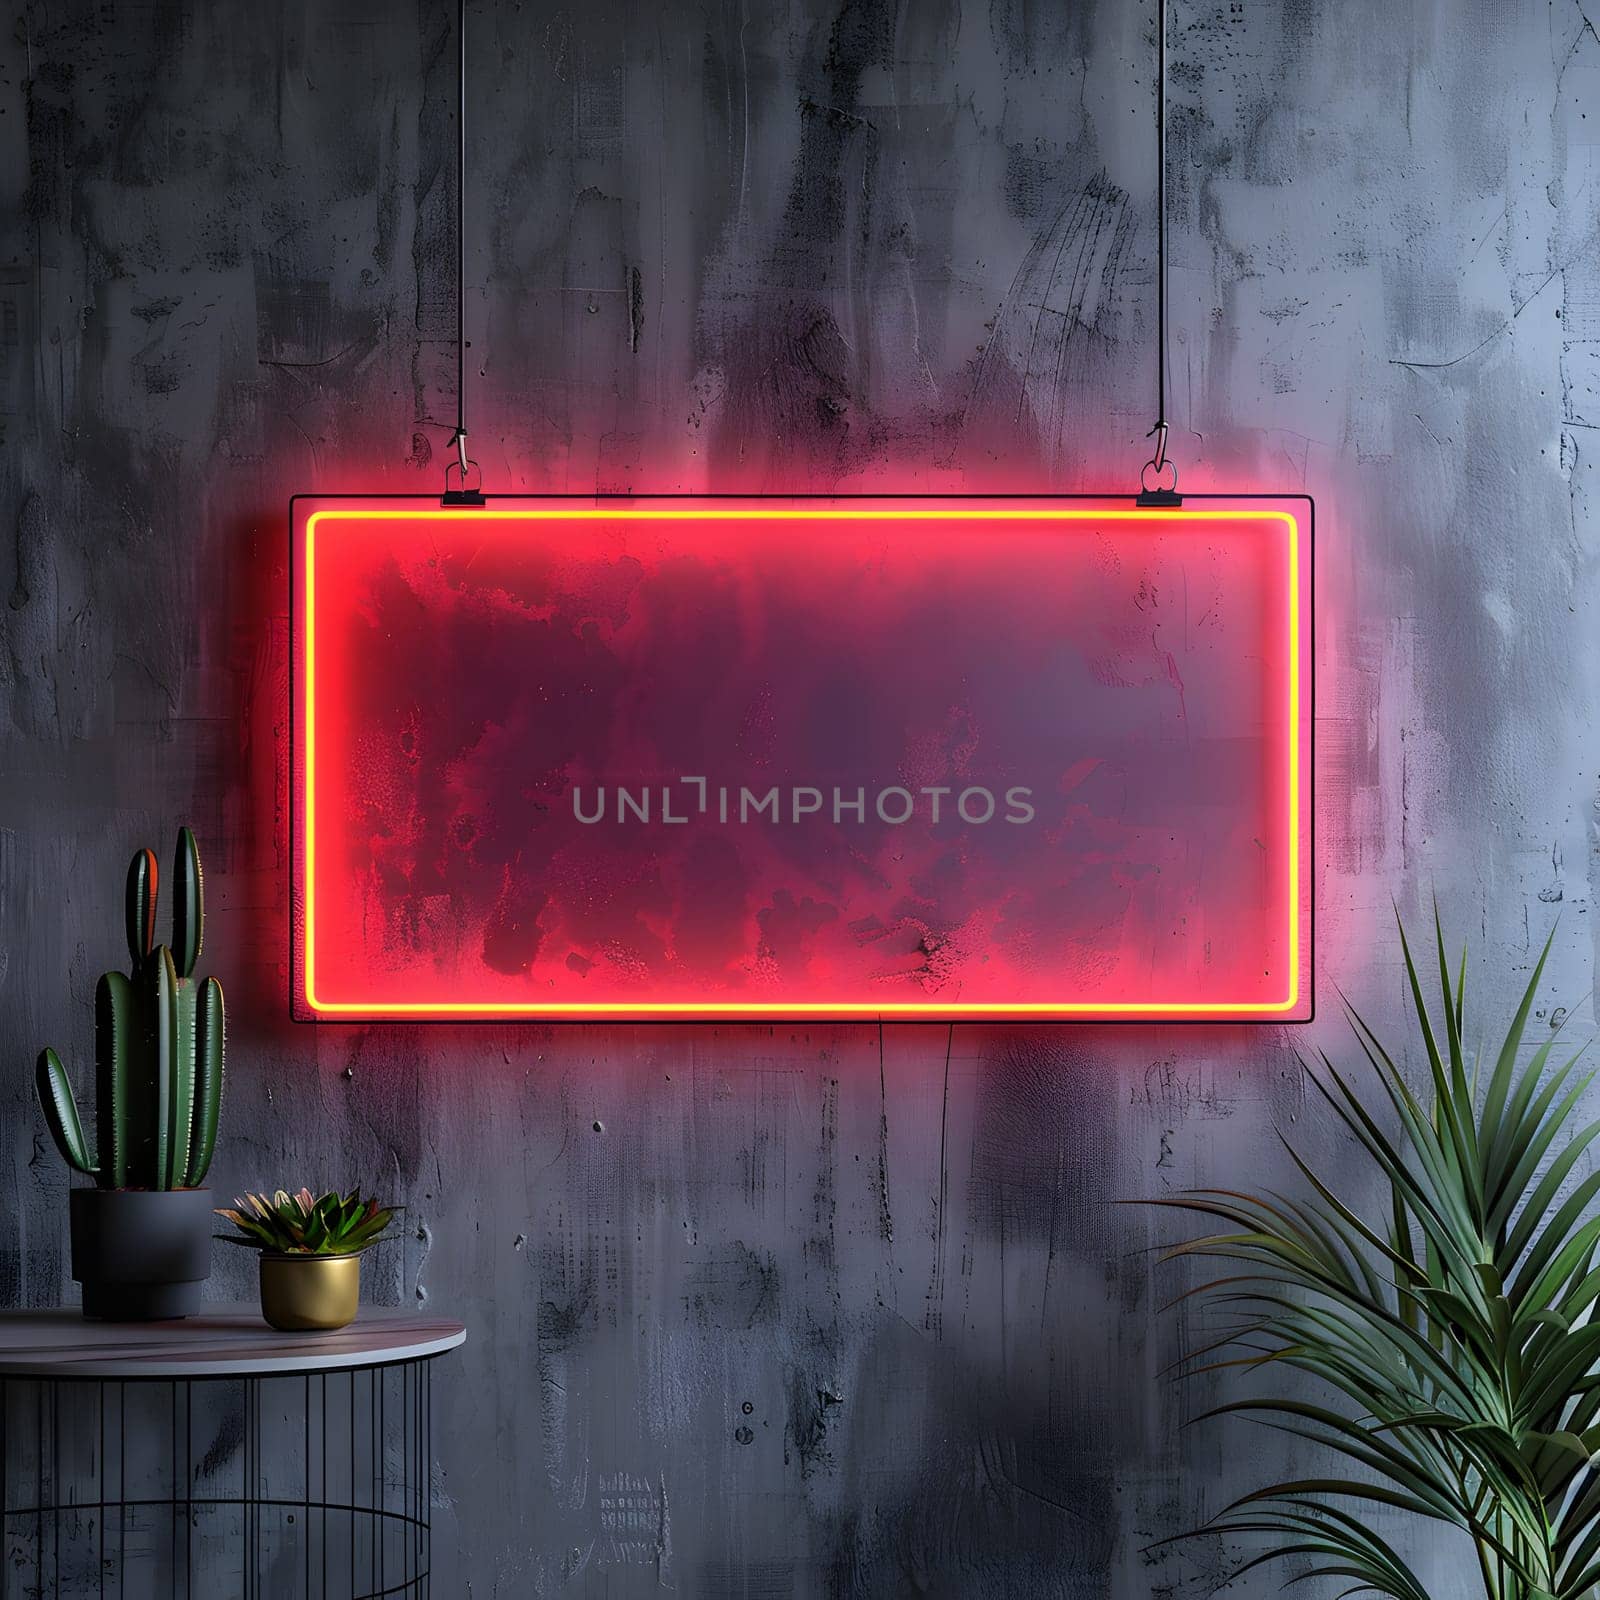 Red neon sign in rectangle font hangs on wall in room by Nadtochiy